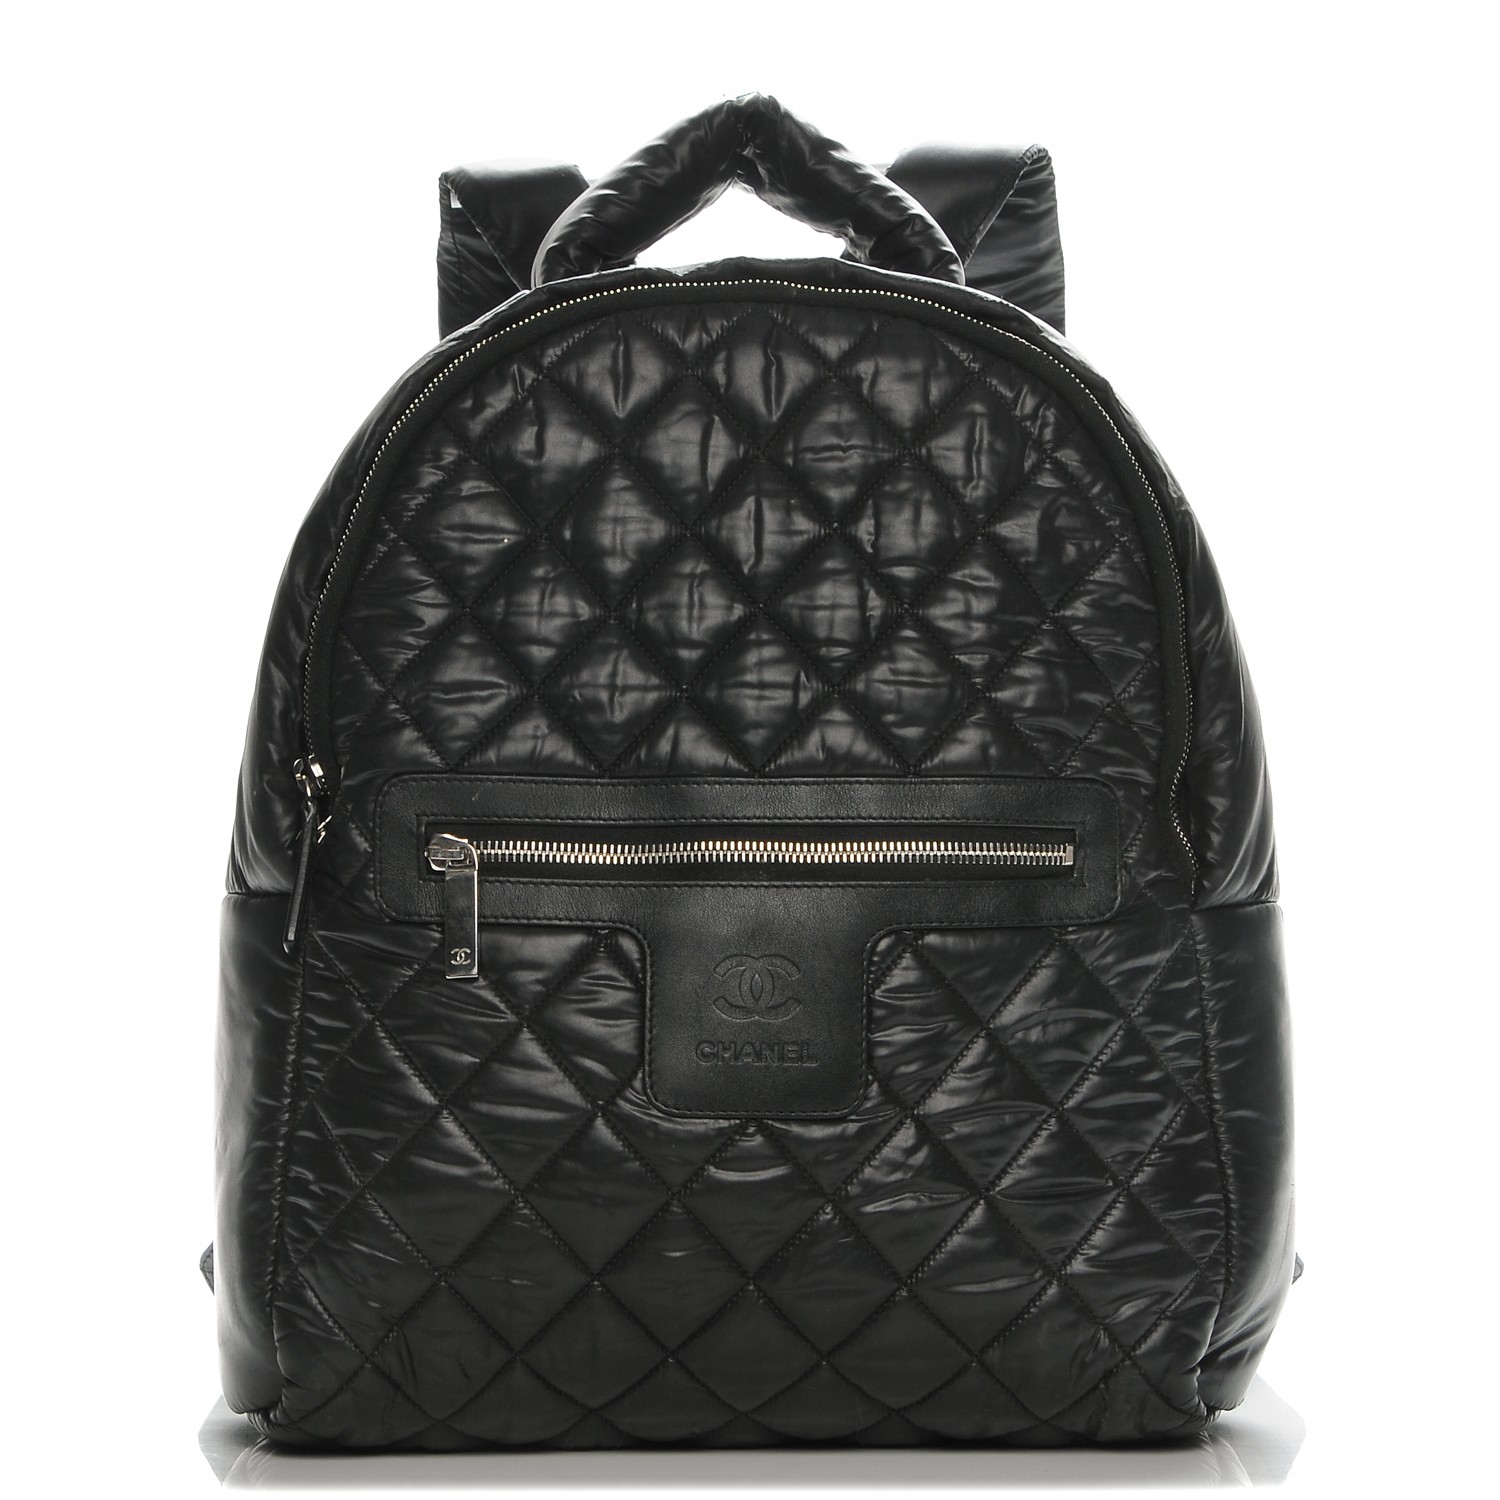 CHANEL Nylon Quilted Coco Cocoon Backpack Black 199930